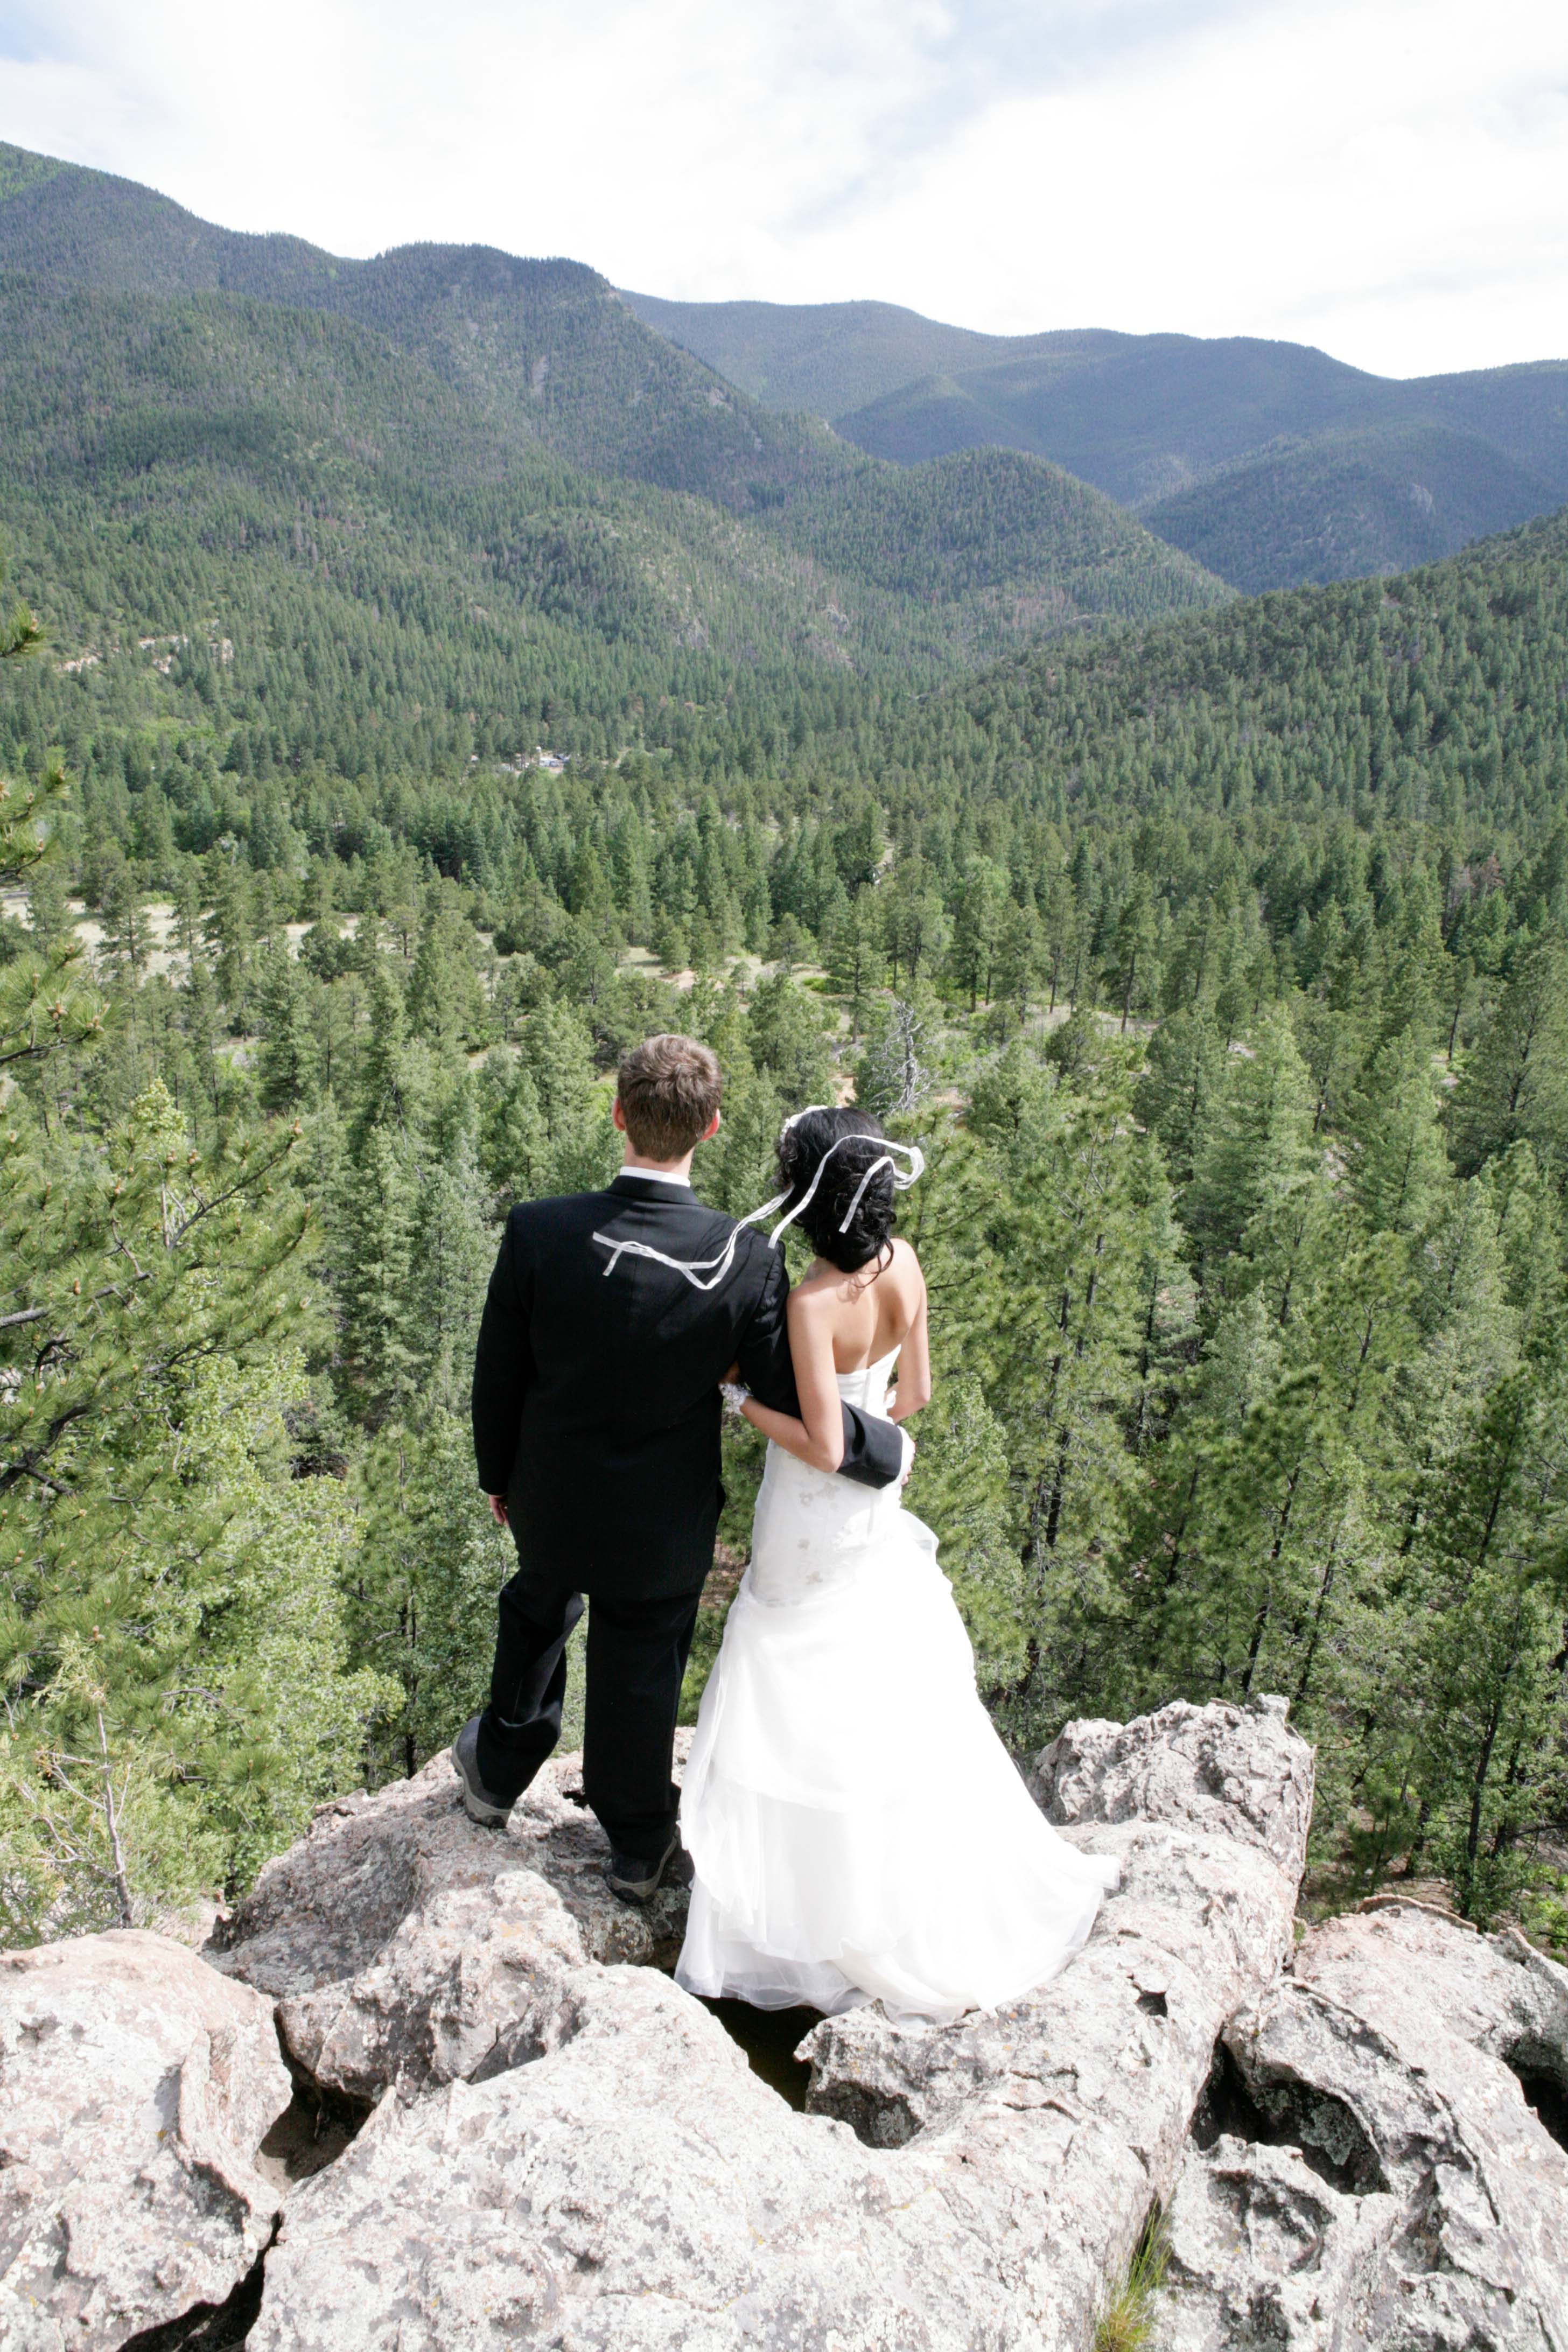 Hike to Ceremony with Incredible Views in Ute Park, NM